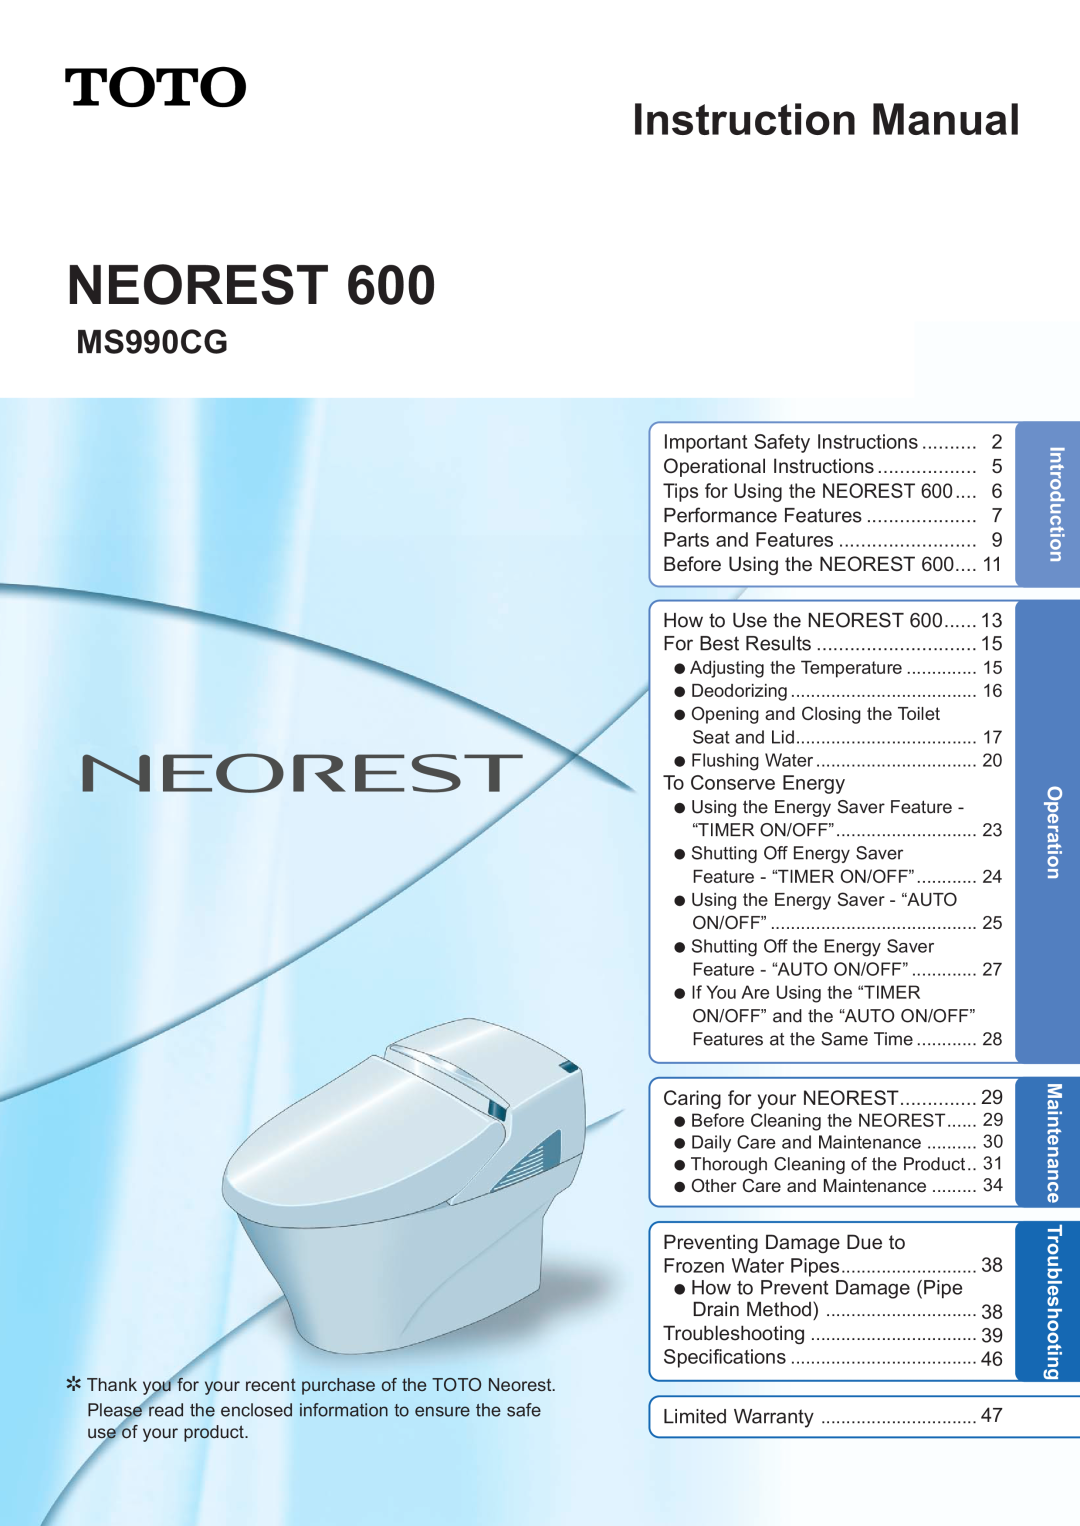 Toto MS990CG instruction manual Neorest 